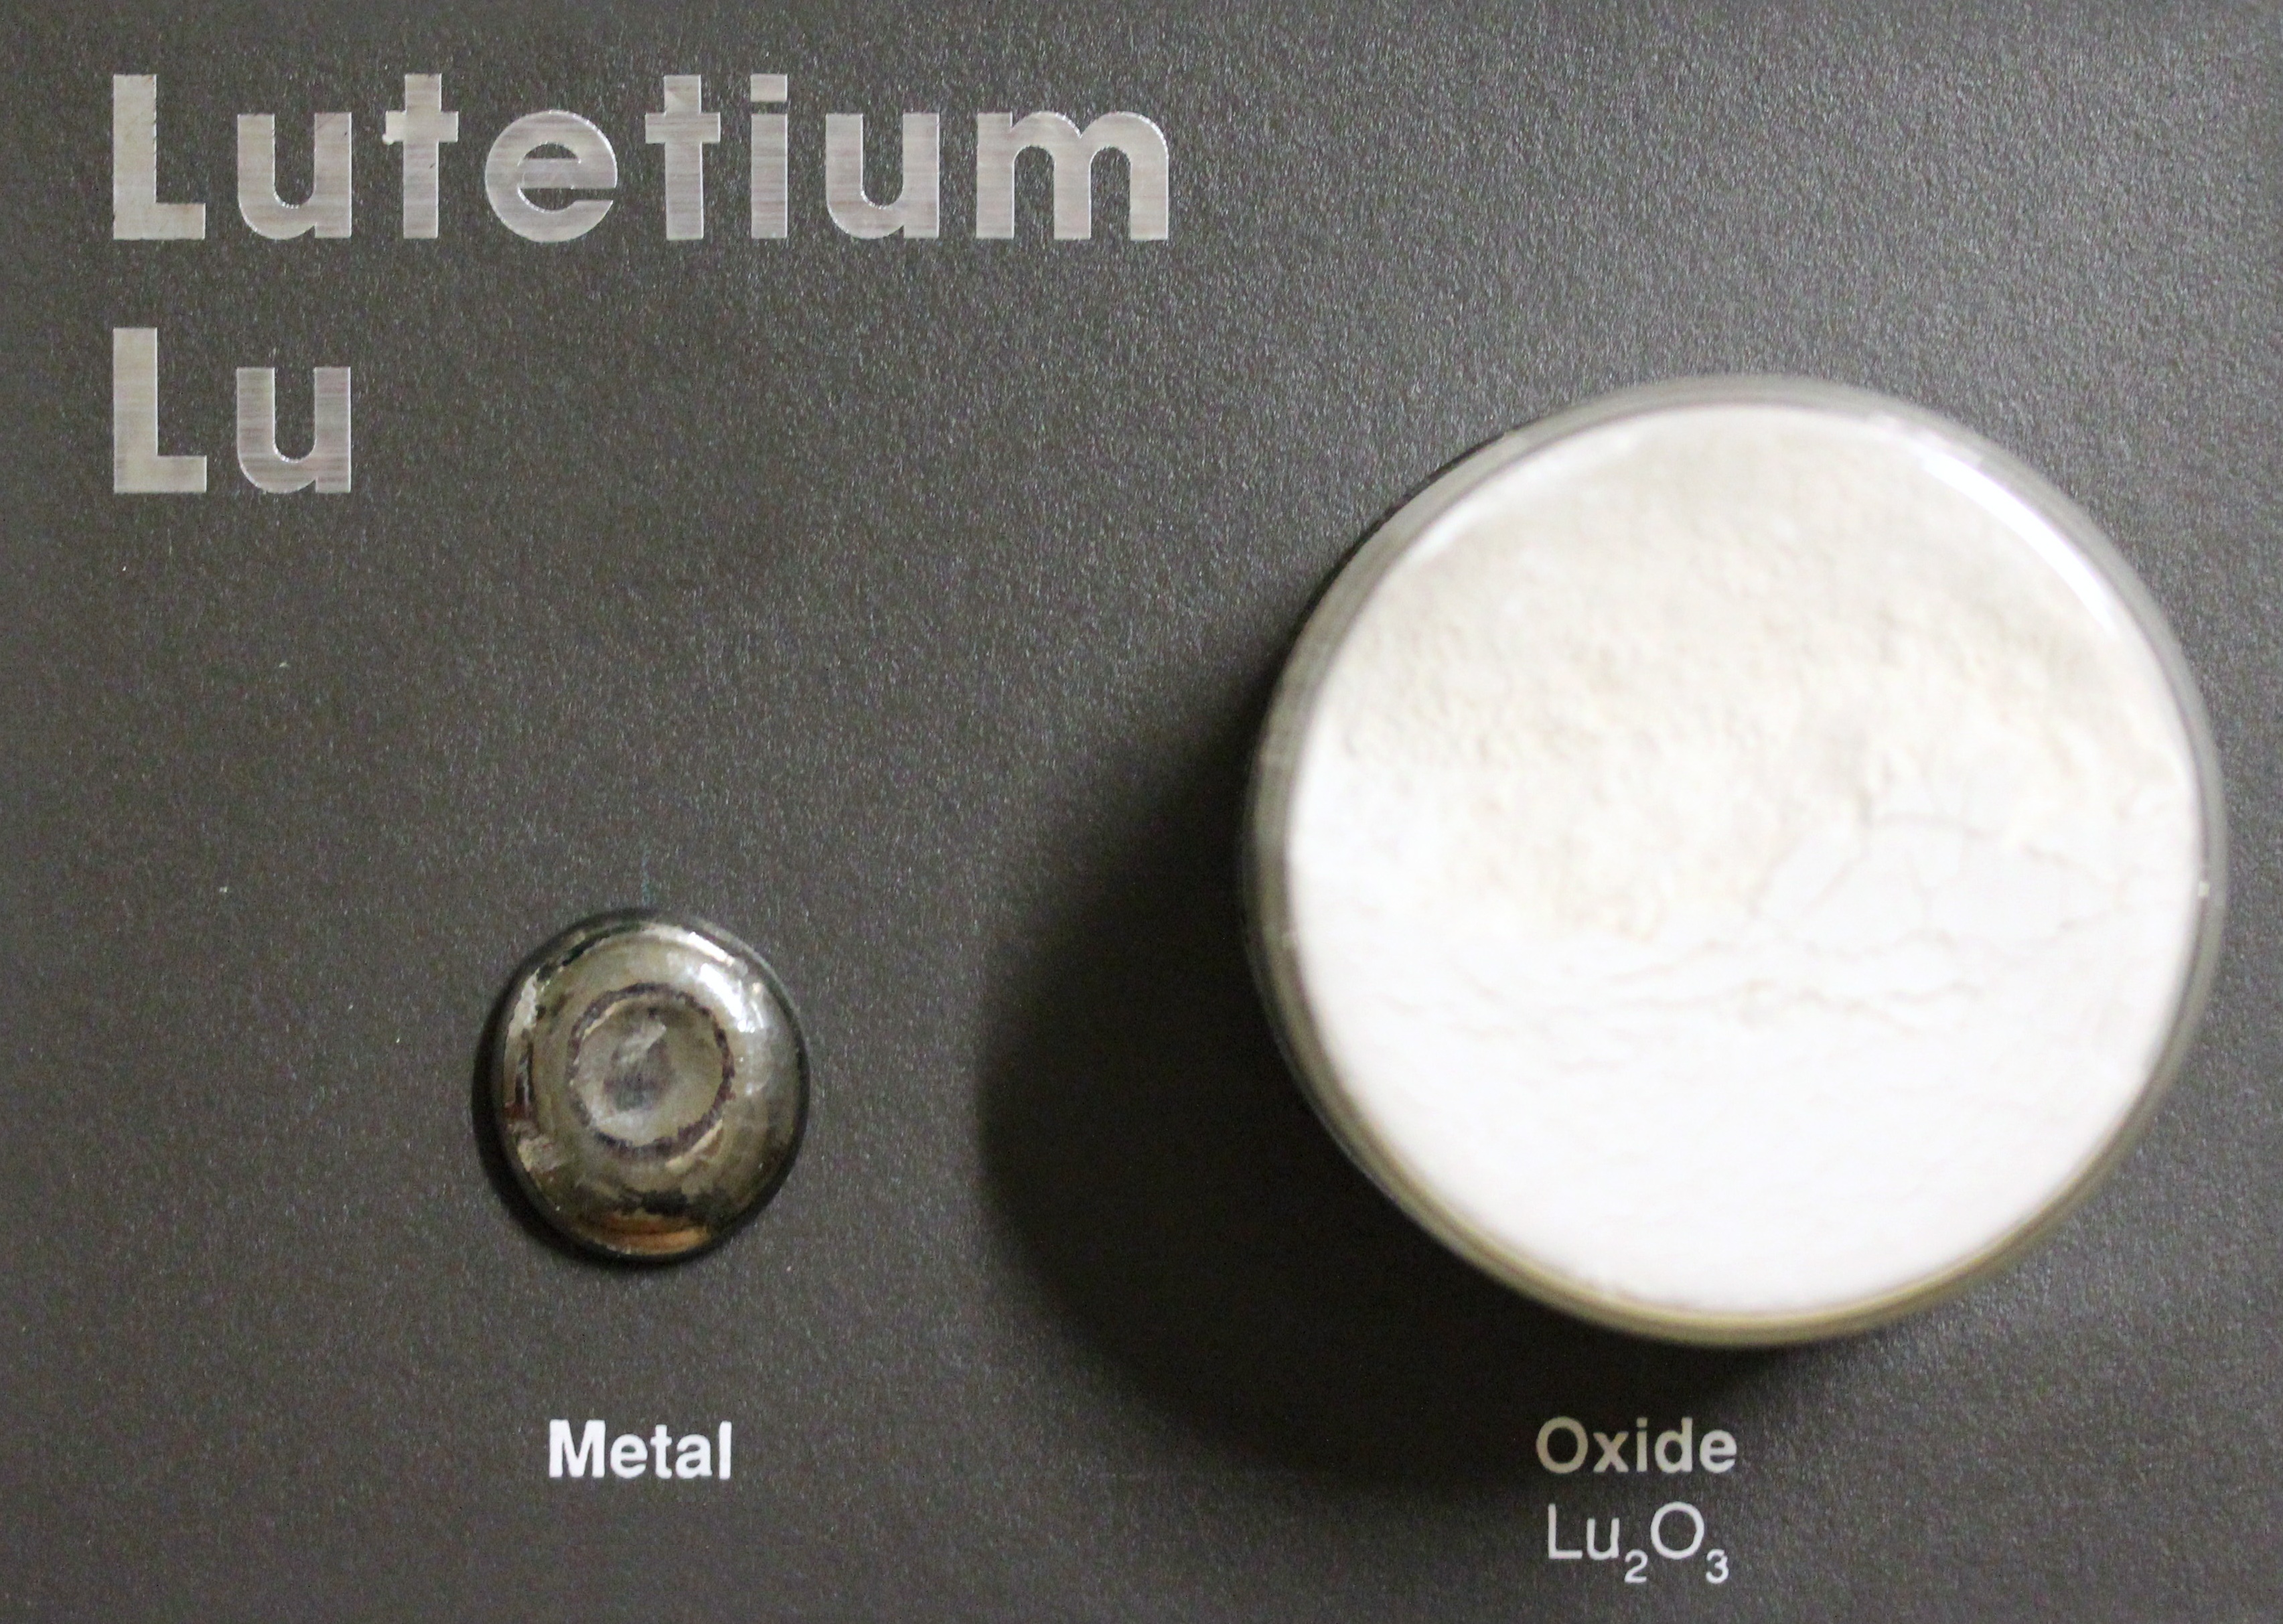 Lutetium metal and oxide